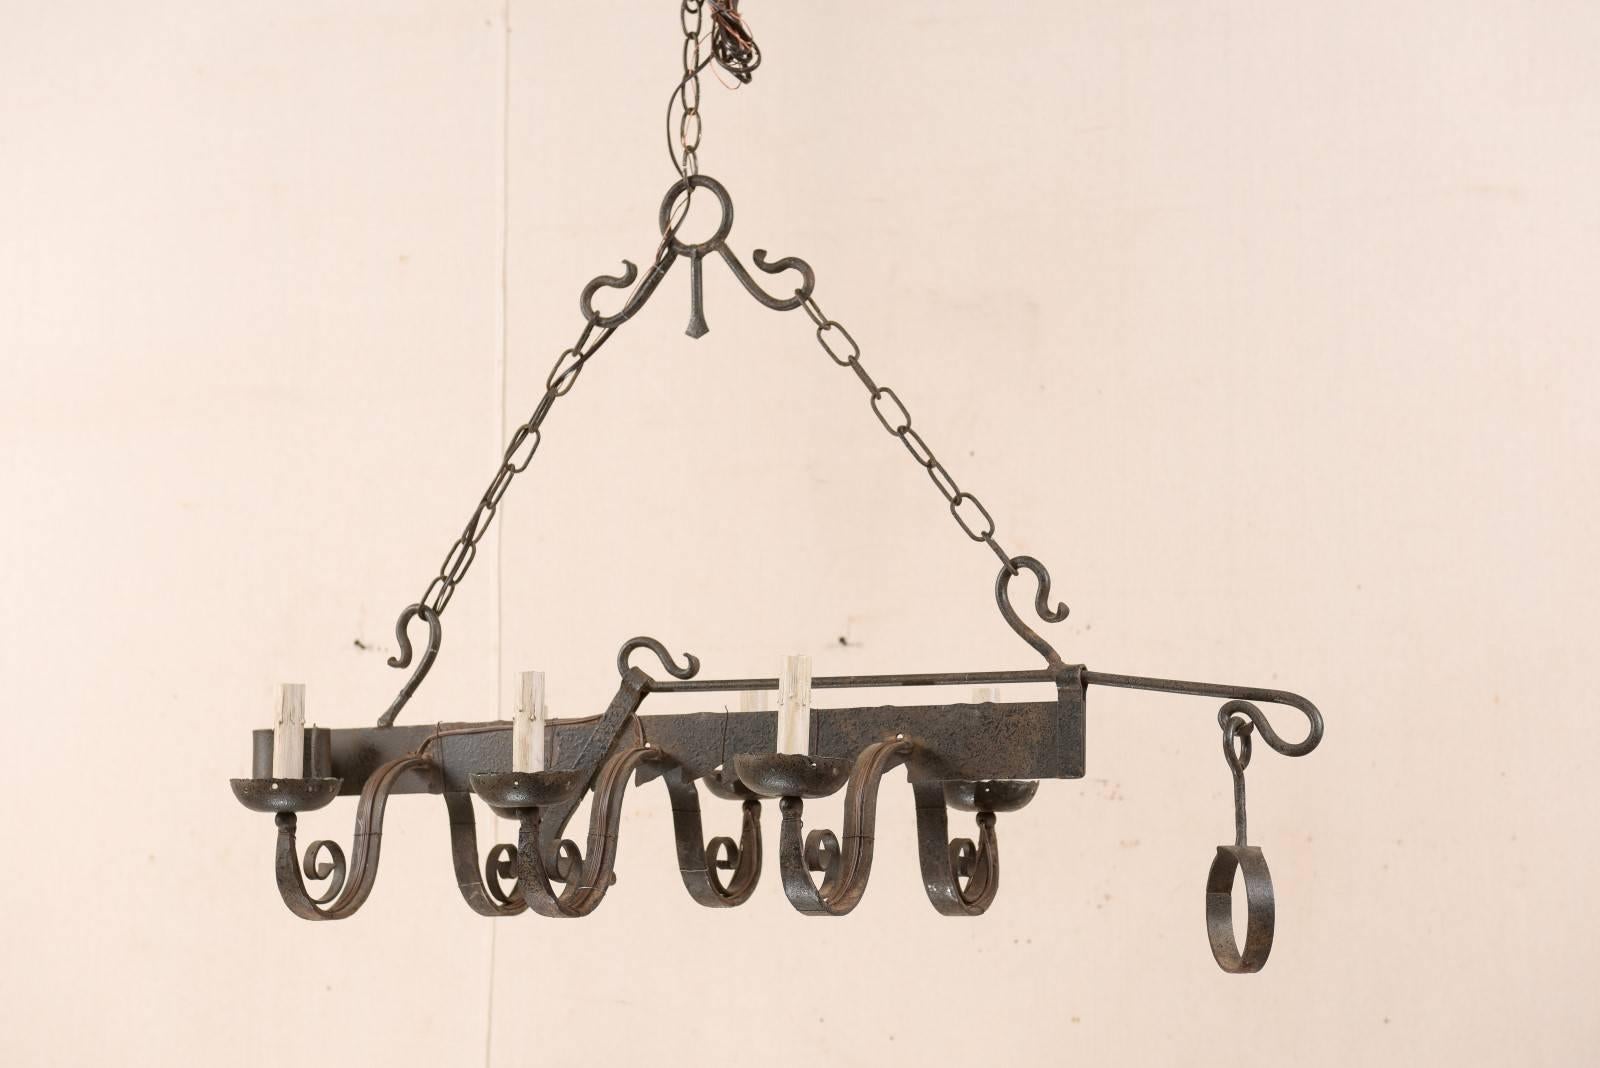 A French midcentury, six-light, forged-iron chandelier fashioned from a 19th century spit-jack. A spit-jack is a type of rotisserie that was once common in fireplaces. This chandelier has six swooping arms with scrolled centers, which connect to the